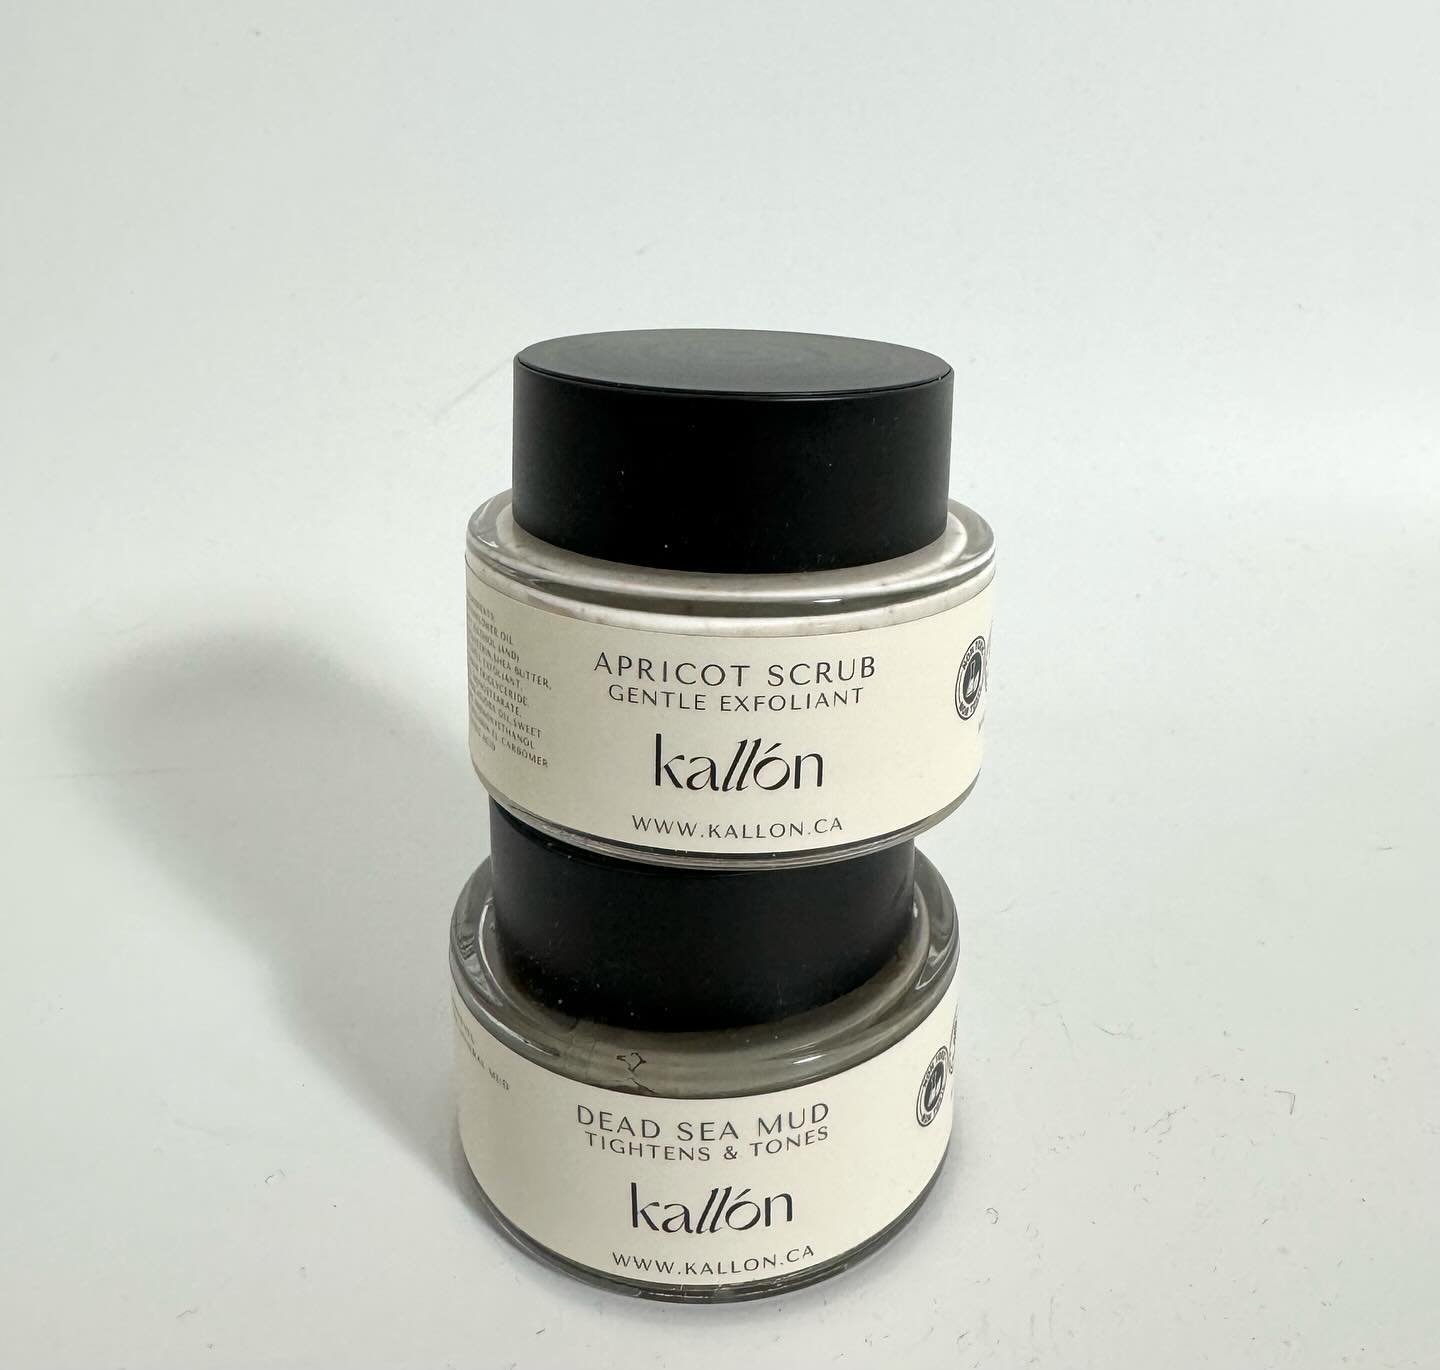 elevate your skincare lineup with our apricot scrub and dead sea mud - the perfect additions to rejuvenate your skin 🤍 

 #kall&oacute;n #kall&oacute;nskin #kall&oacute;nskincare #skincare #moisturizer #healthyglow #skincareaddict #skincareessential